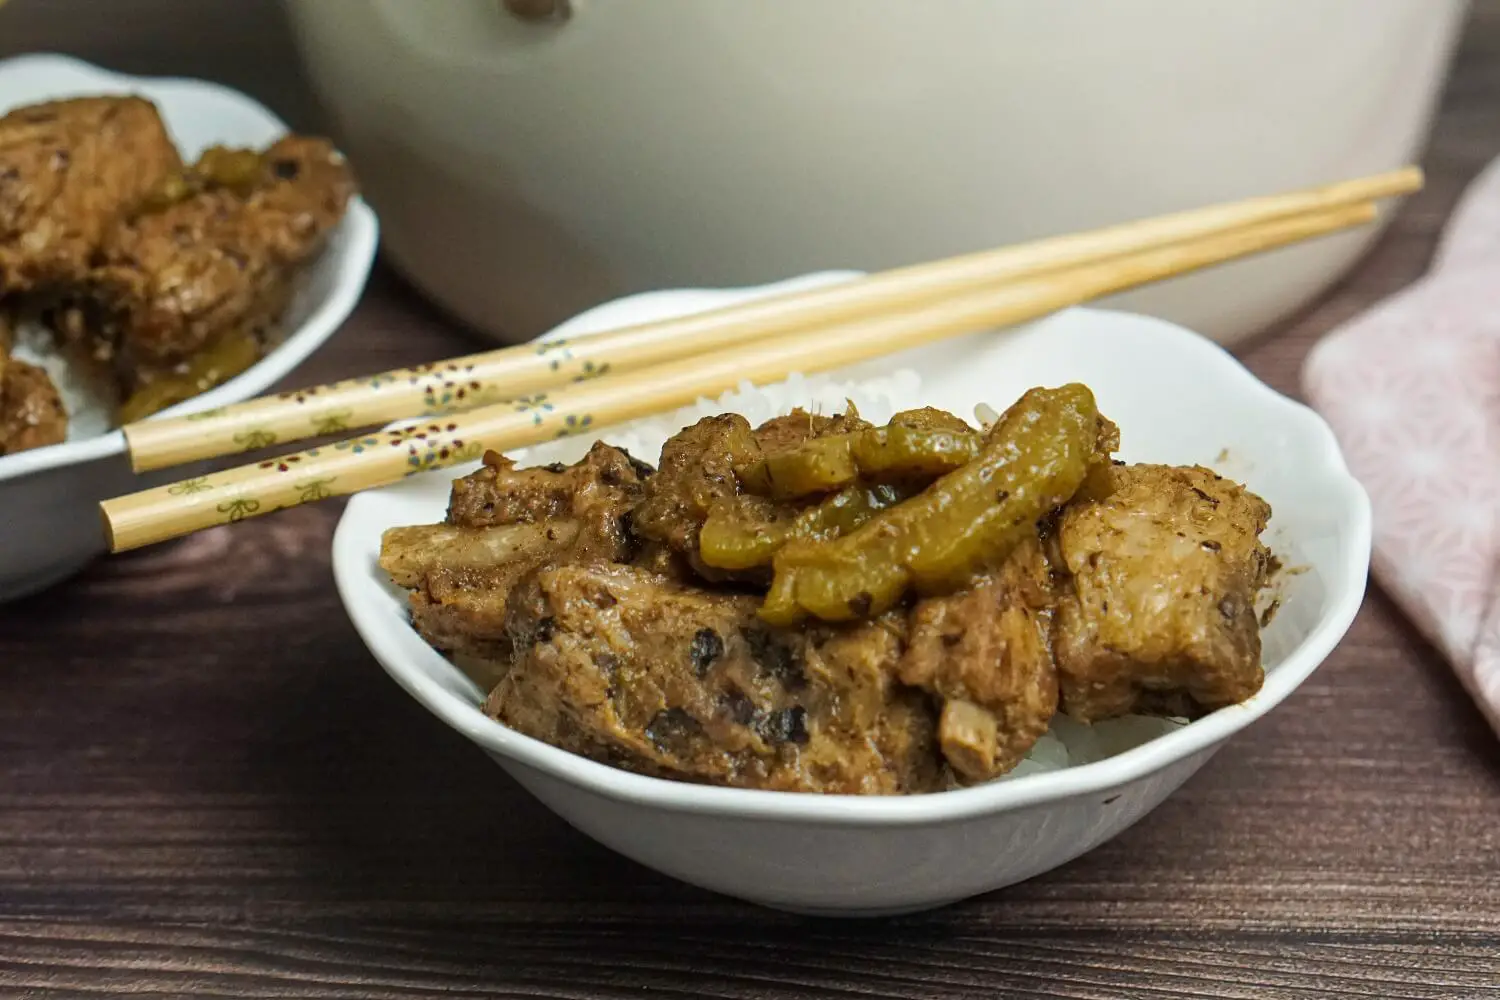 Chinese Braised Pork Ribs with Bitter Gourd 苦瓜焖排骨